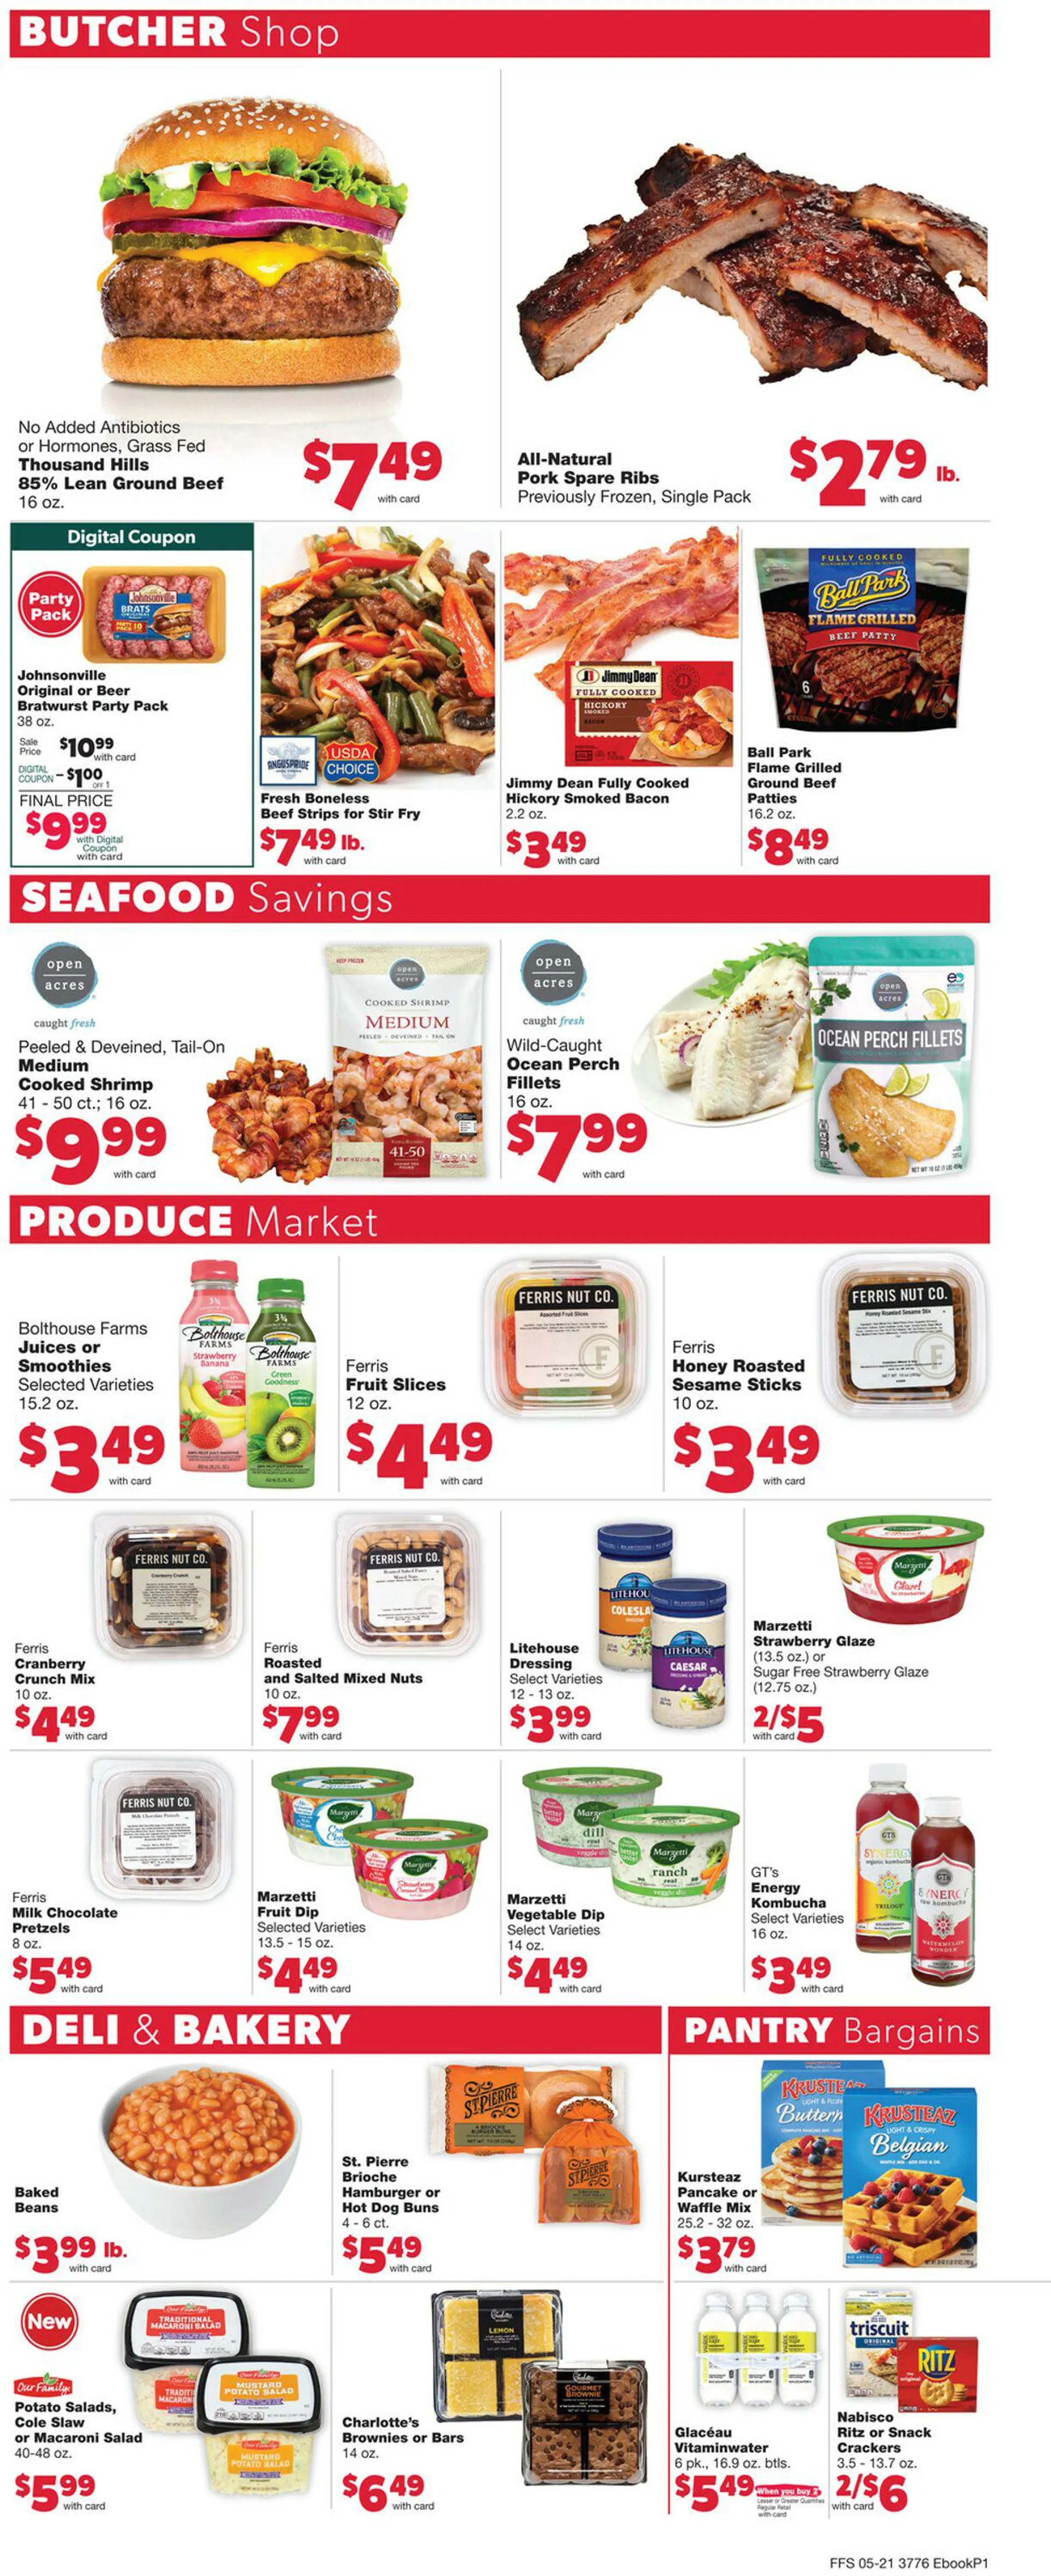 Family Fare Current weekly ad - 7